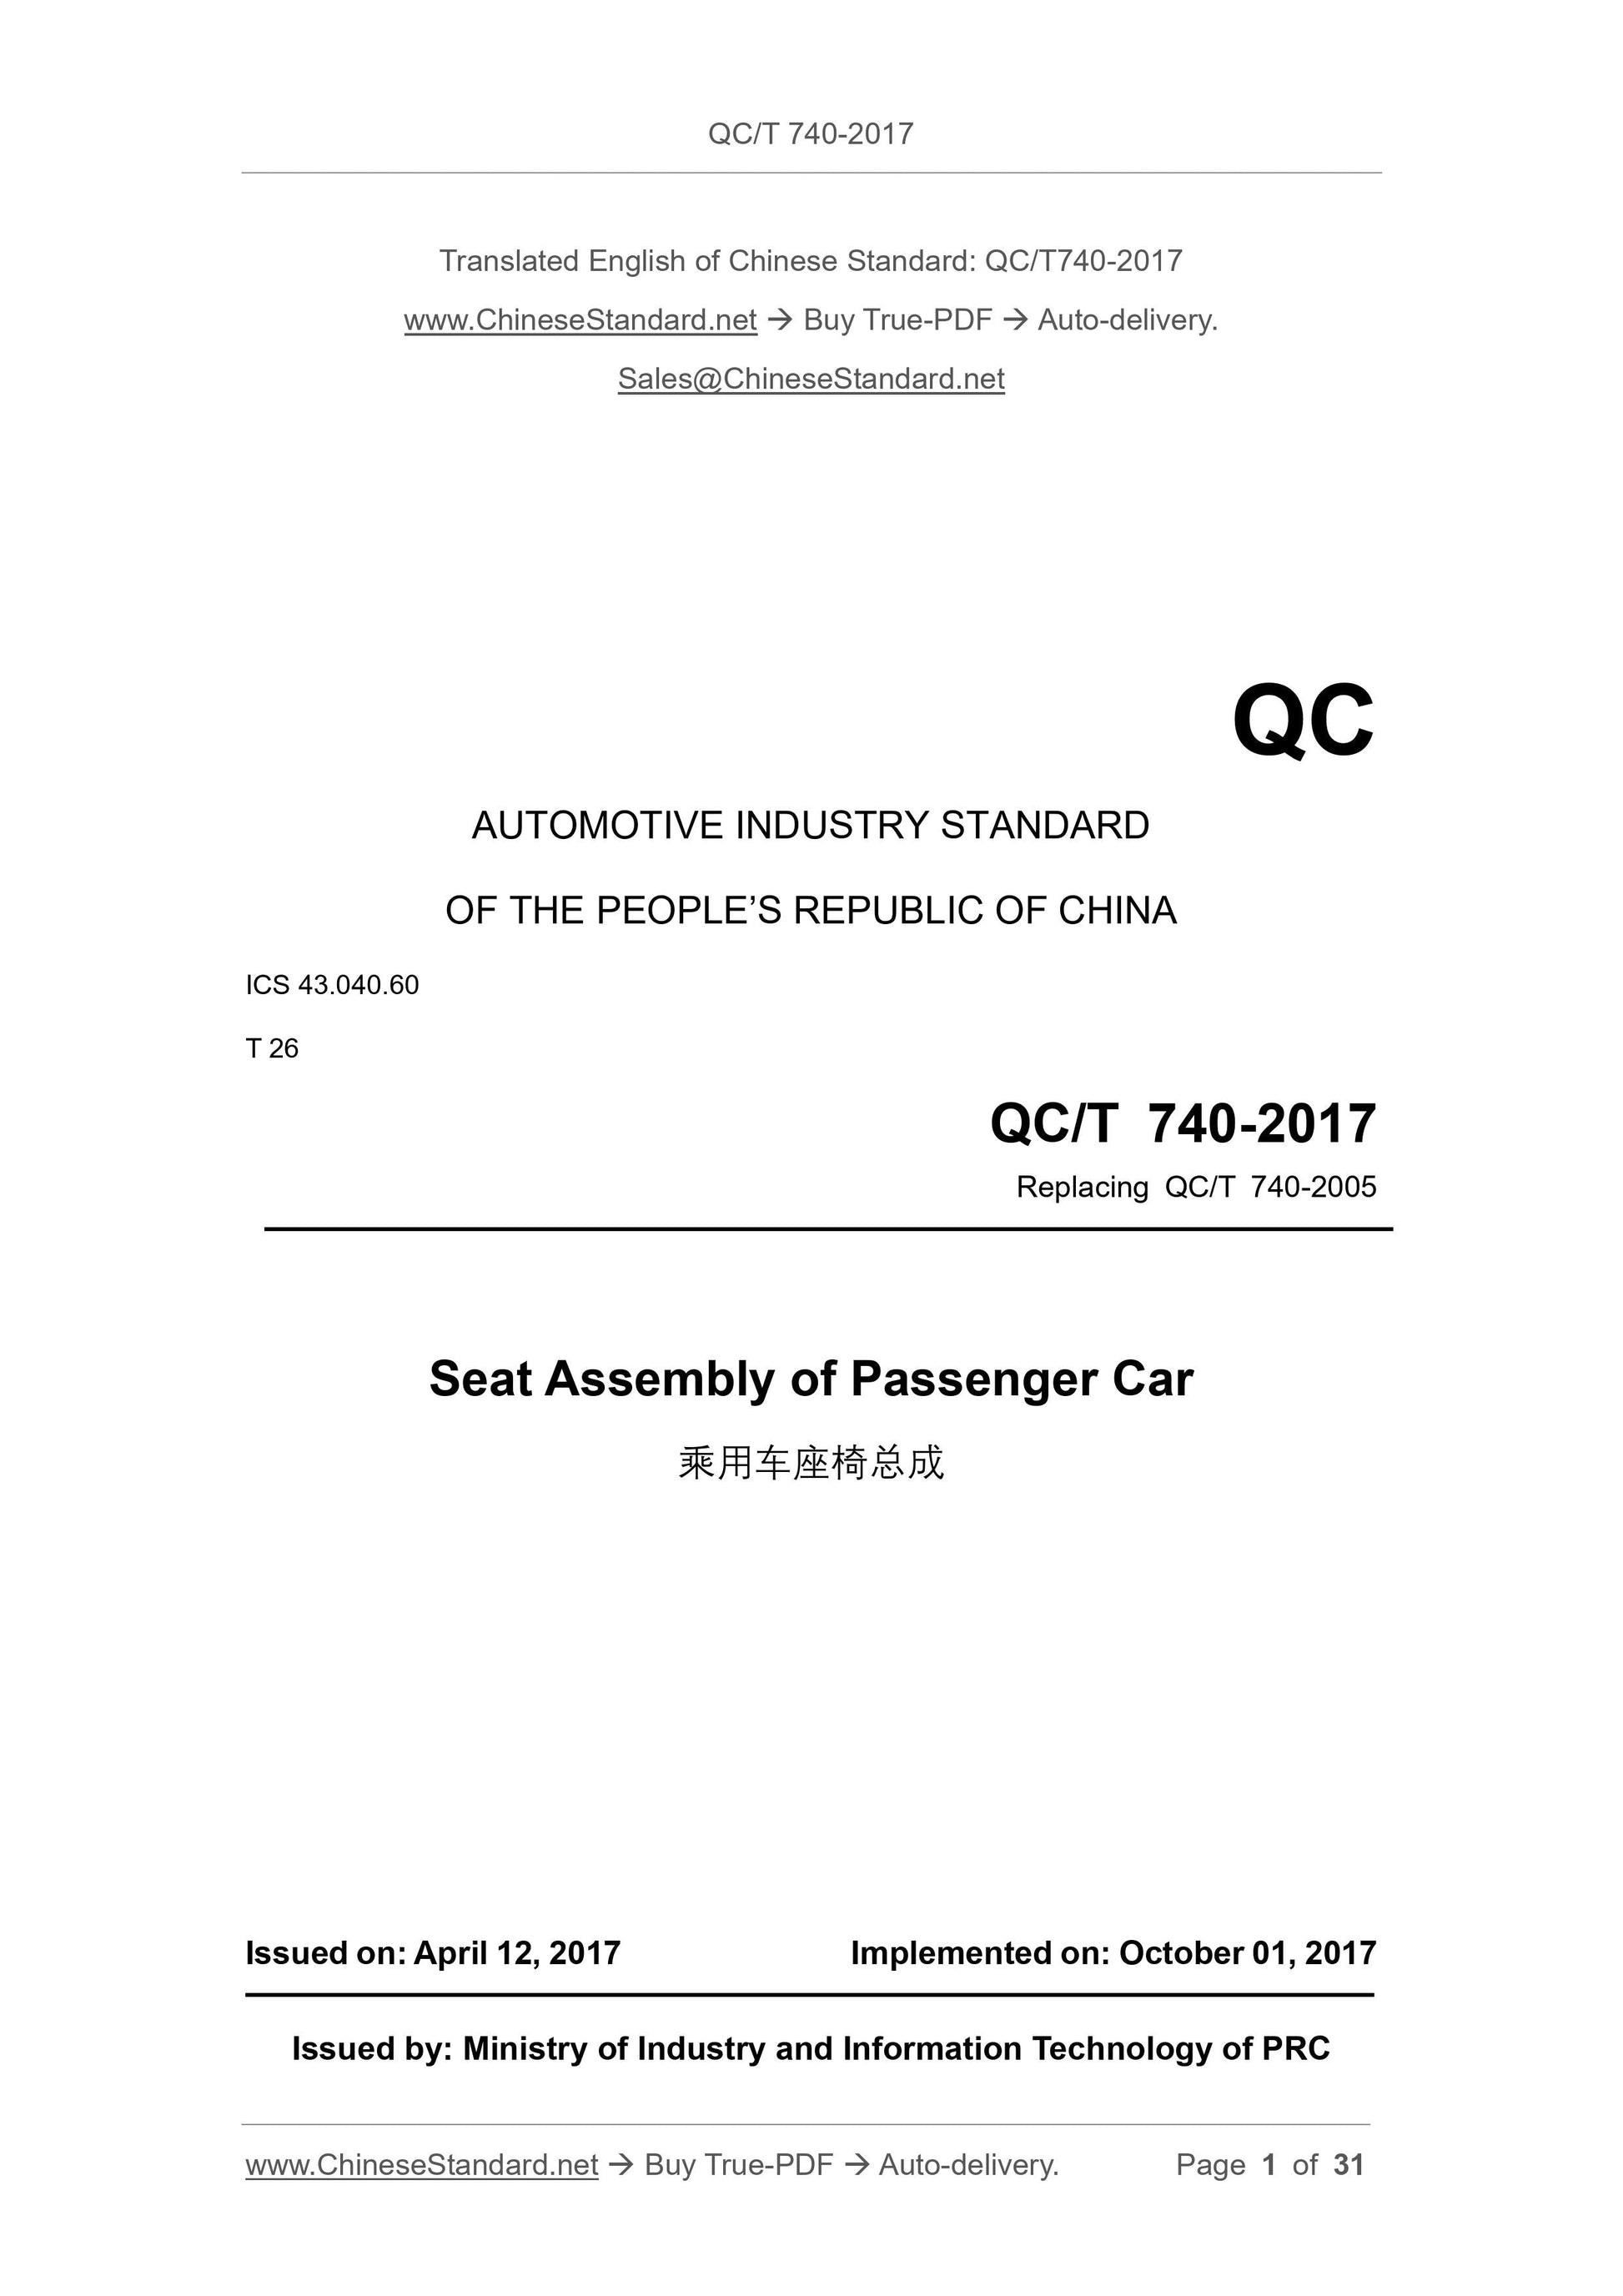 QC/T 740-2017 Page 1